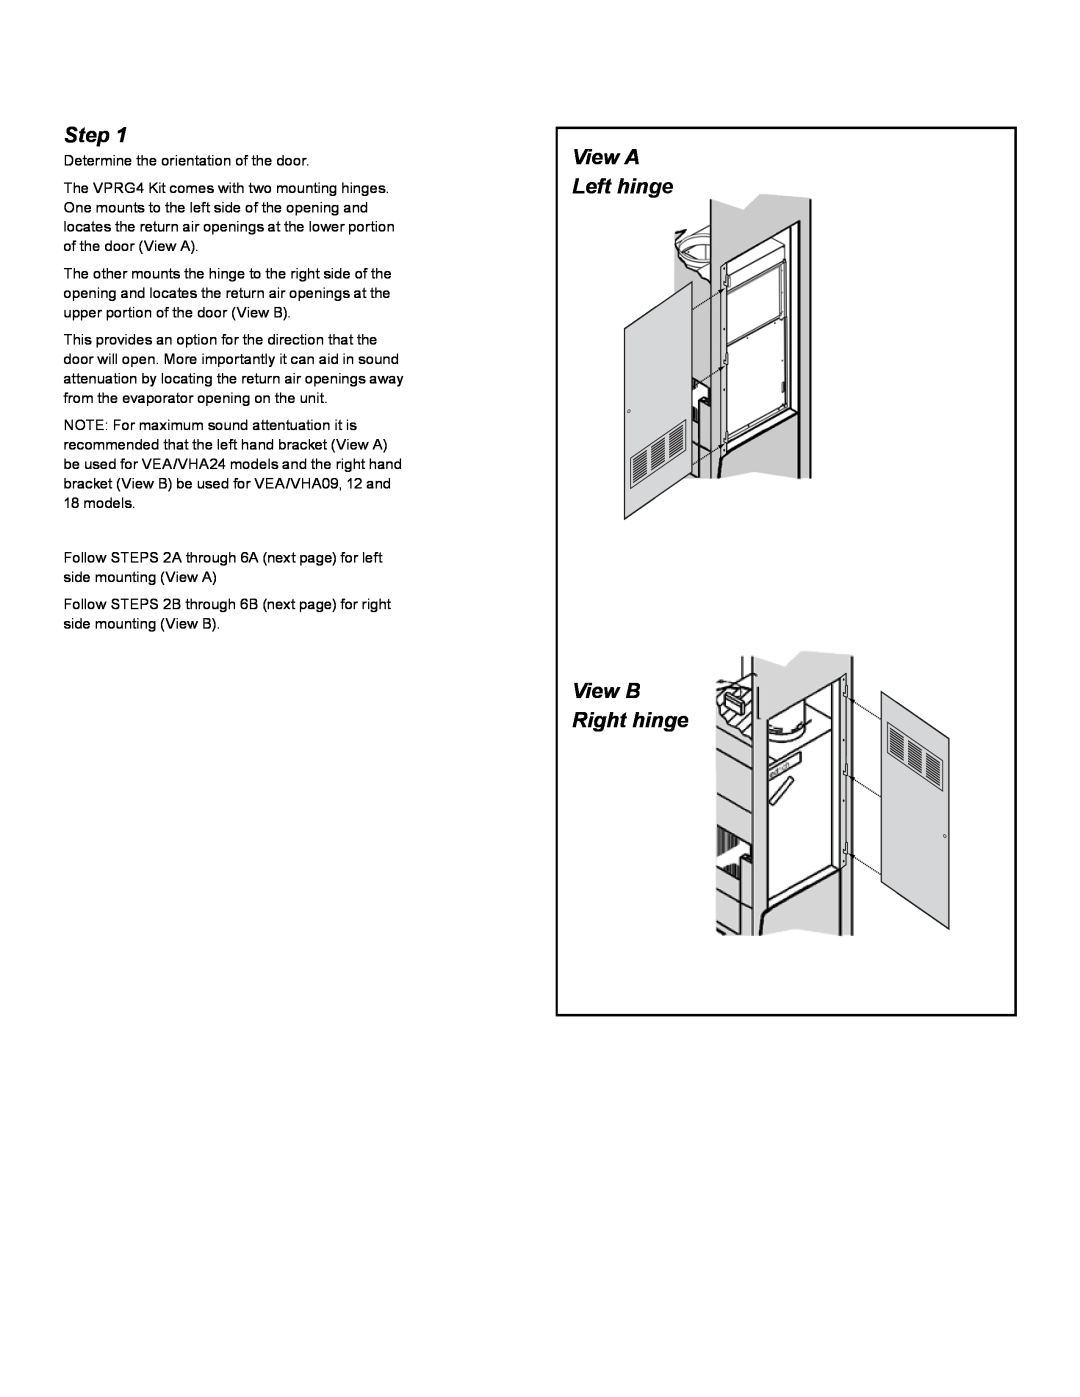 Friedrich VPRG4 installation instructions Step, View A Left hinge View B Right hinge 